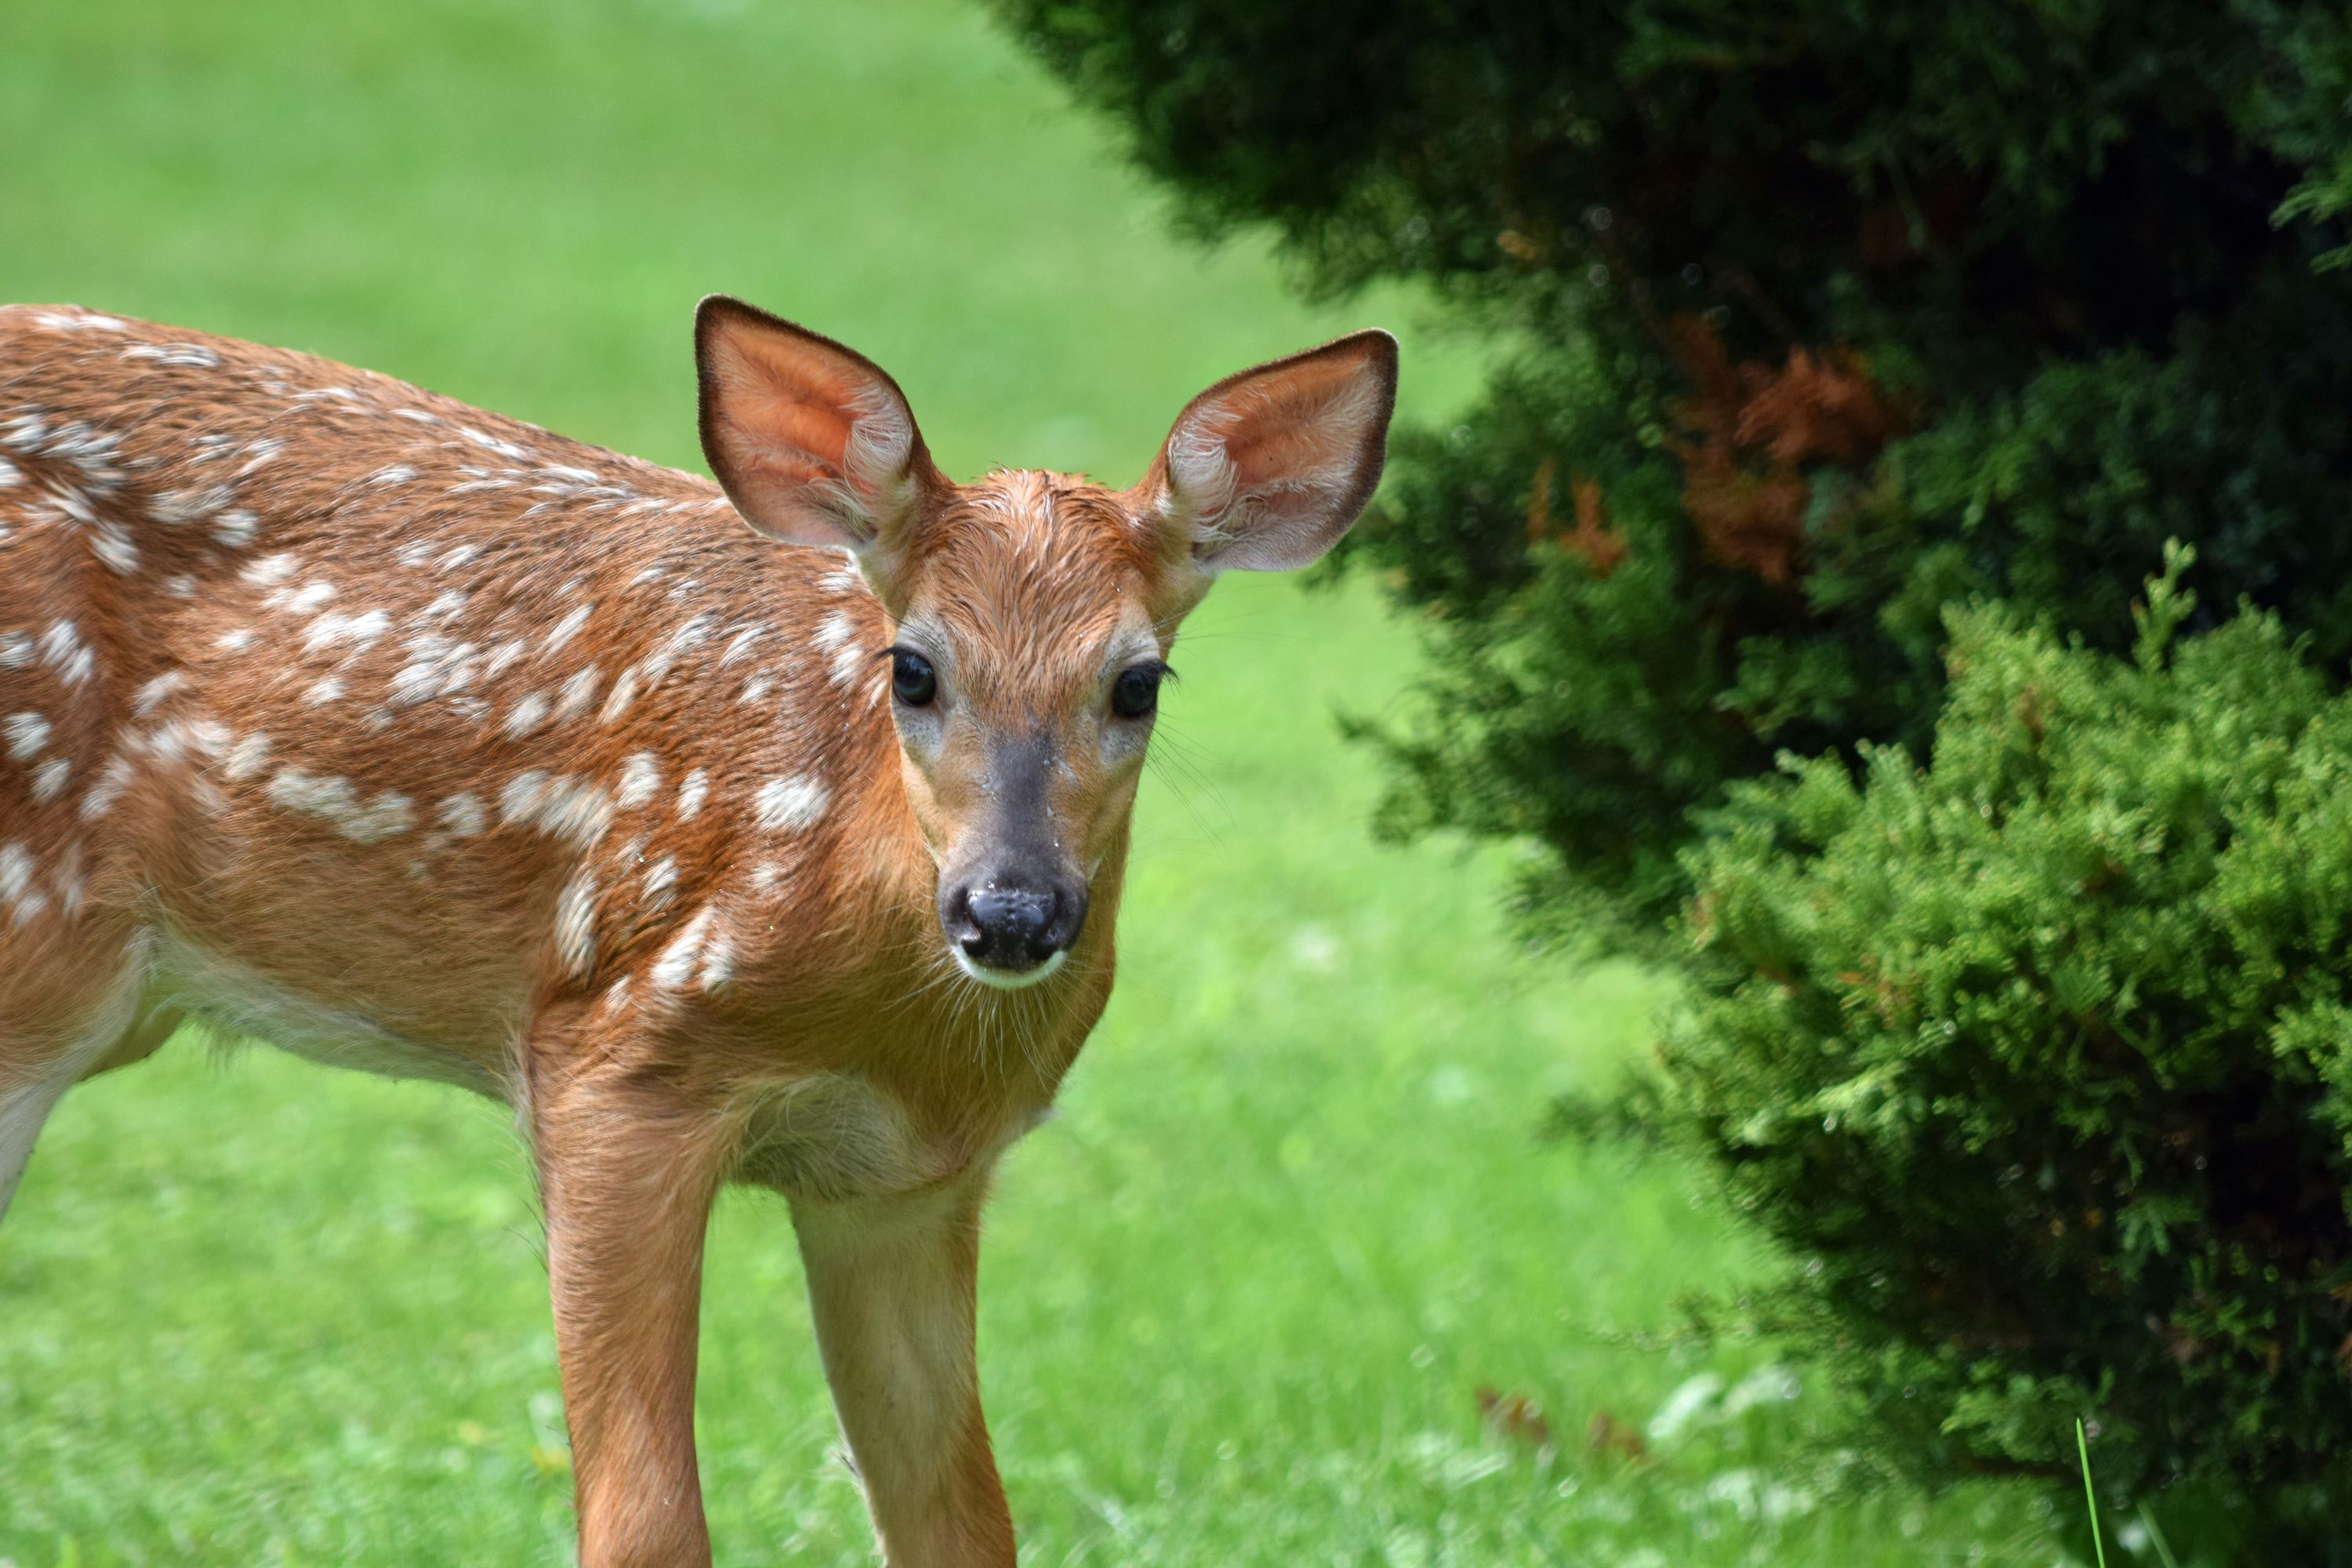 How to Keep Deer Out of Your Garden - Repelling Deer From Flowers